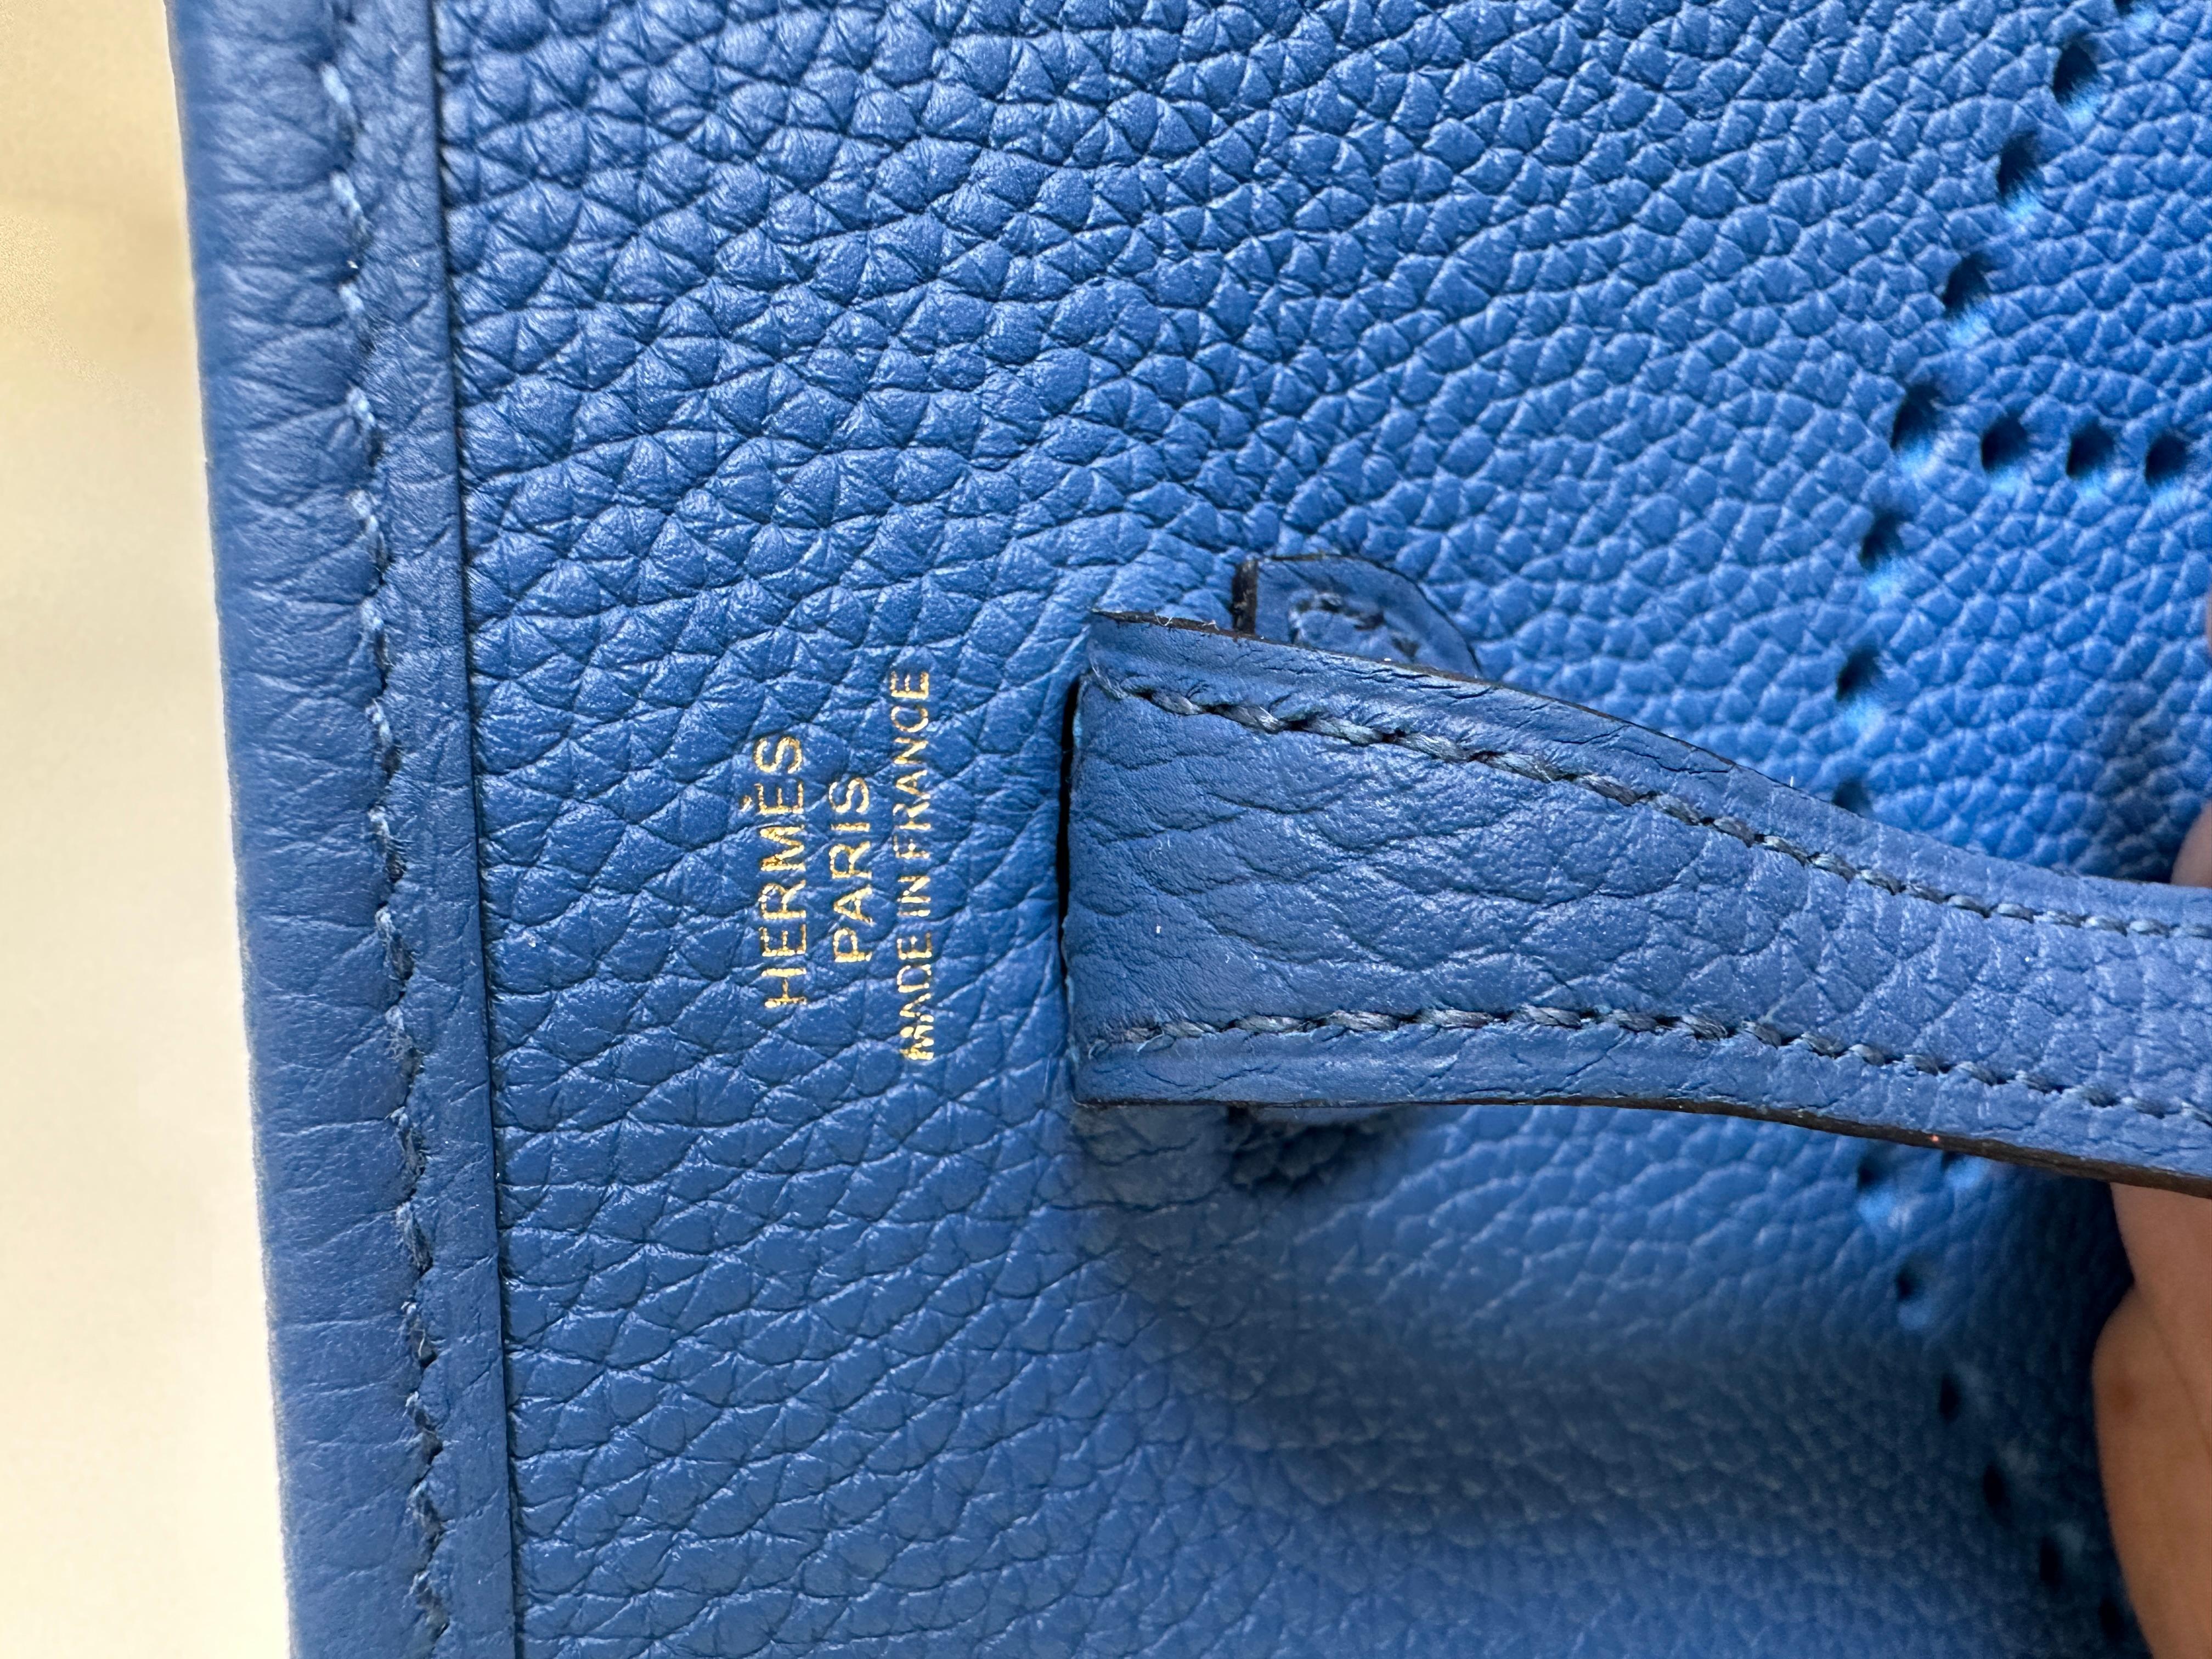 Hermes Evelyne Tpm 16
This Evelyne TPM is in Blue France clemence leather with palladium hardware and features tonal stitching stitching, pull tab top closure and a blue removable canvas and leather shoulder/crossbody strap.

The interior is lined